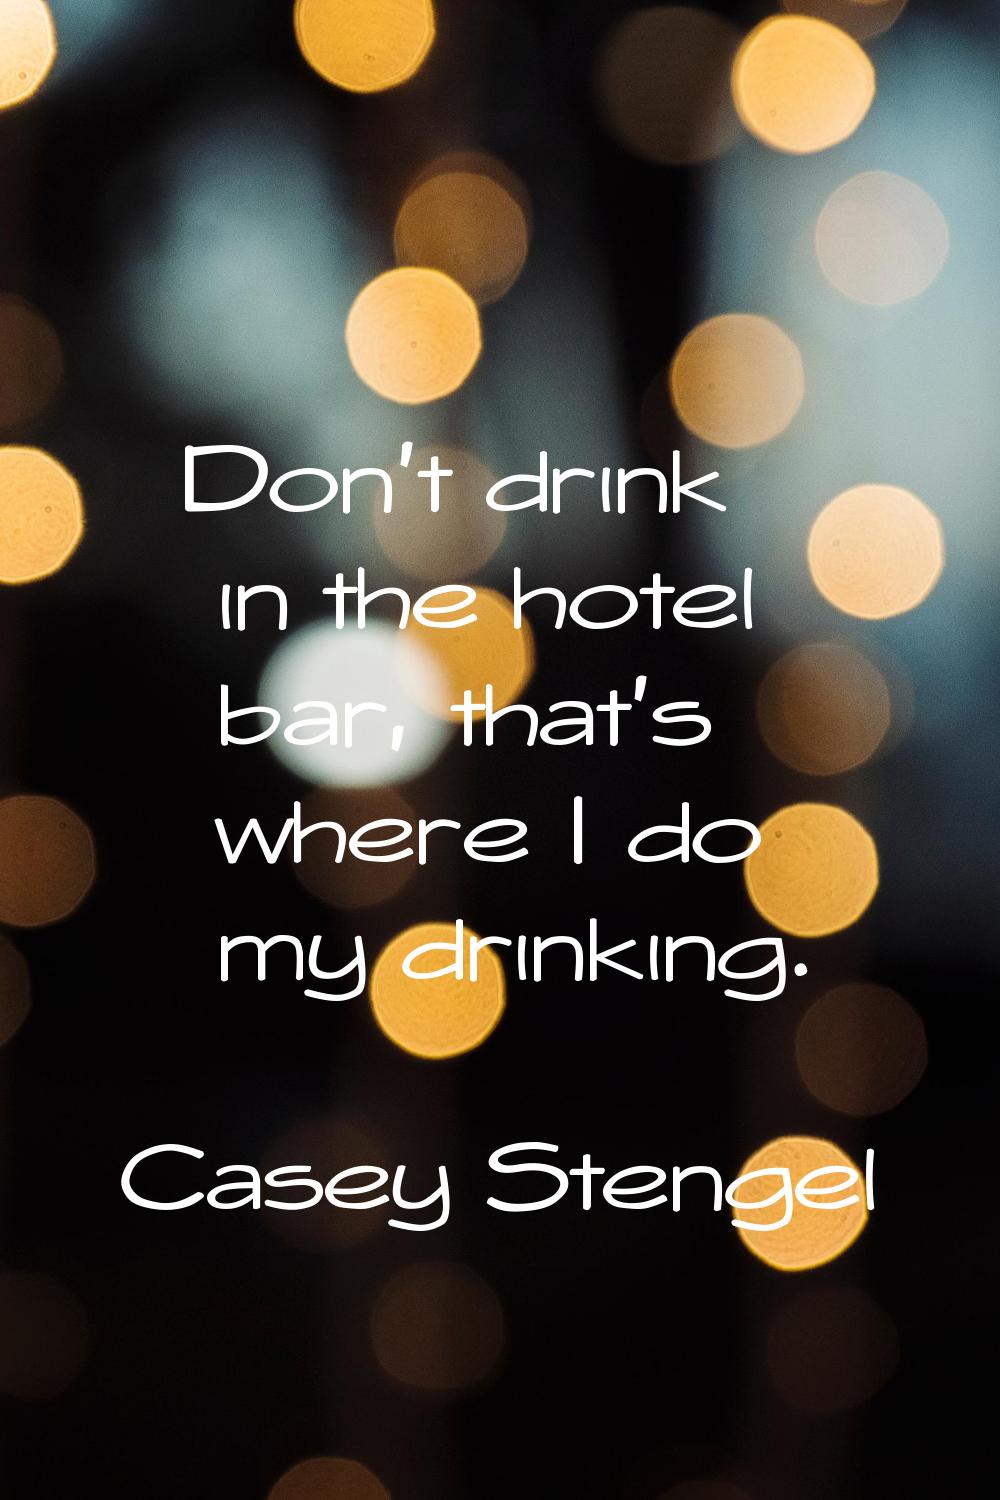 Don't drink in the hotel bar, that's where I do my drinking.